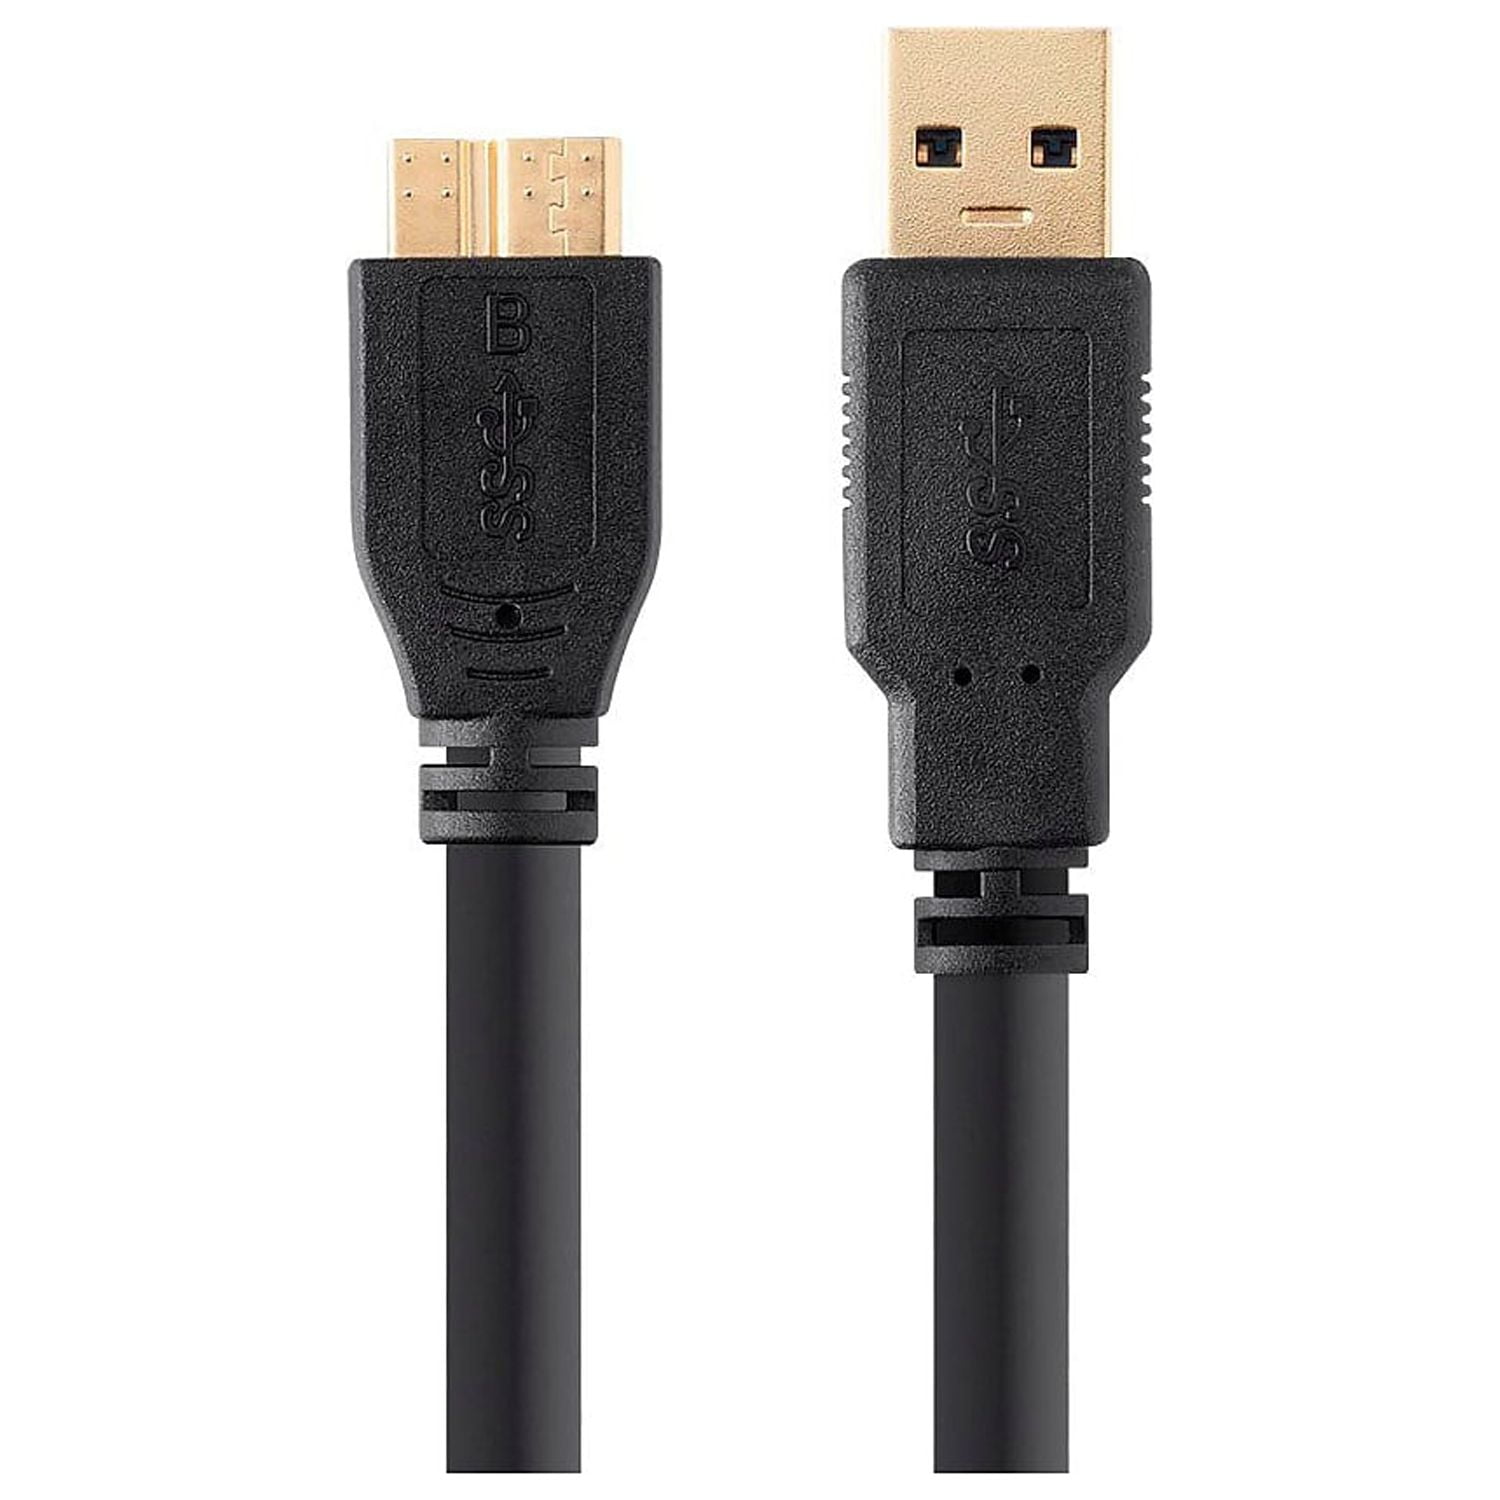 Basics USB-A to Mini USB 2.0 Fast Charging Cable, 480Mbps Transfer  Speed with Gold-Plated Plugs, 3 Foot, Black